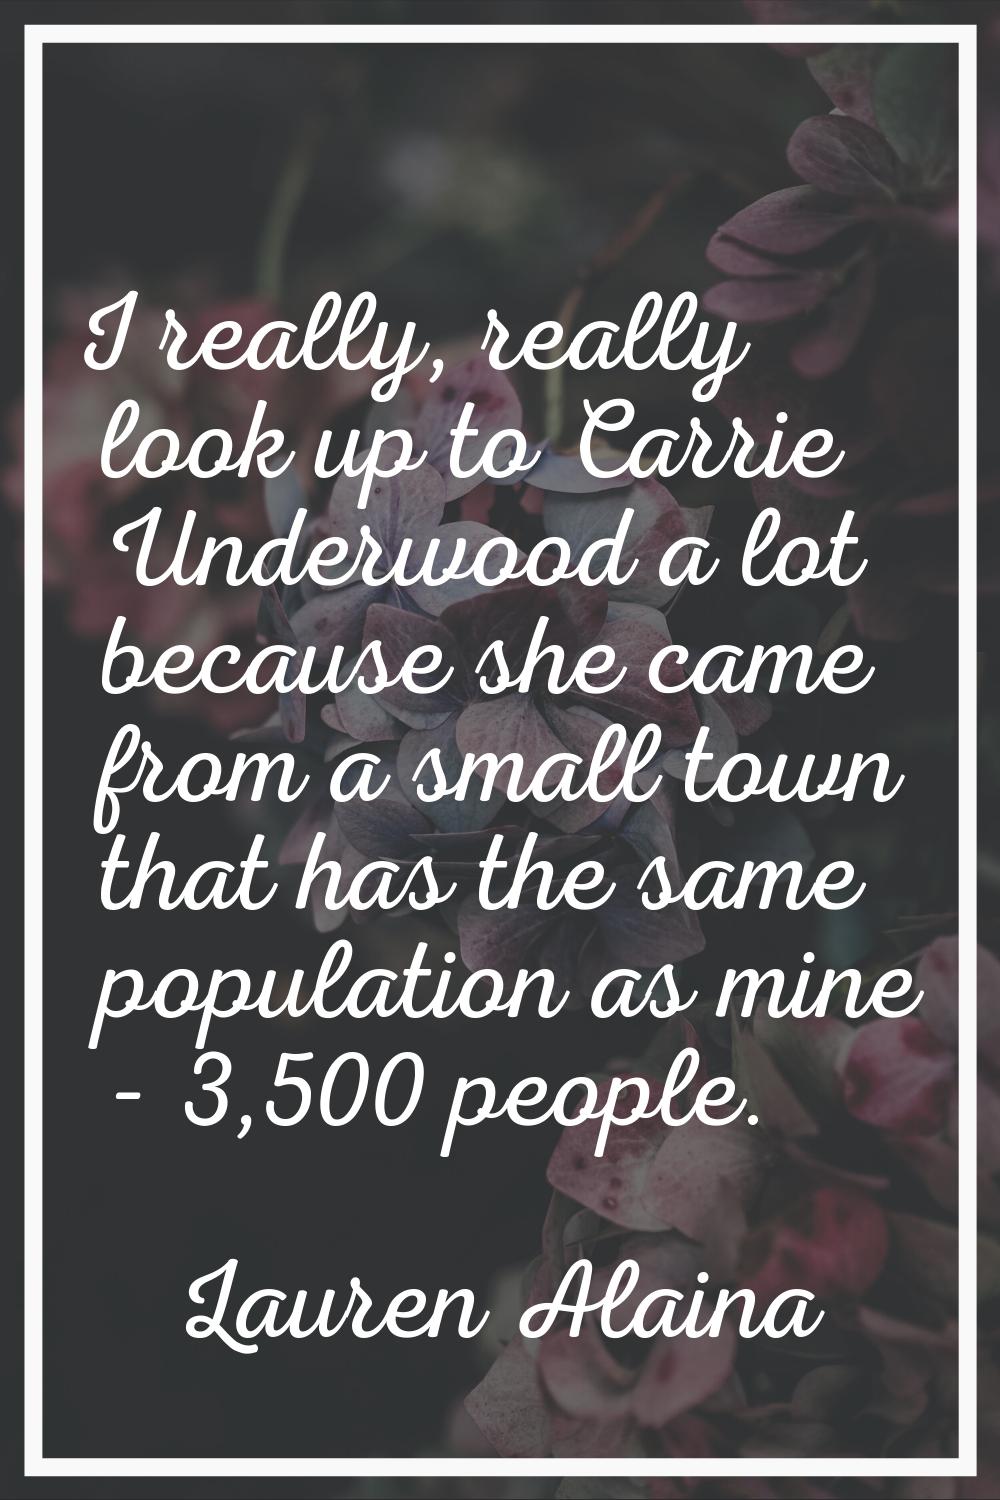 I really, really look up to Carrie Underwood a lot because she came from a small town that has the 